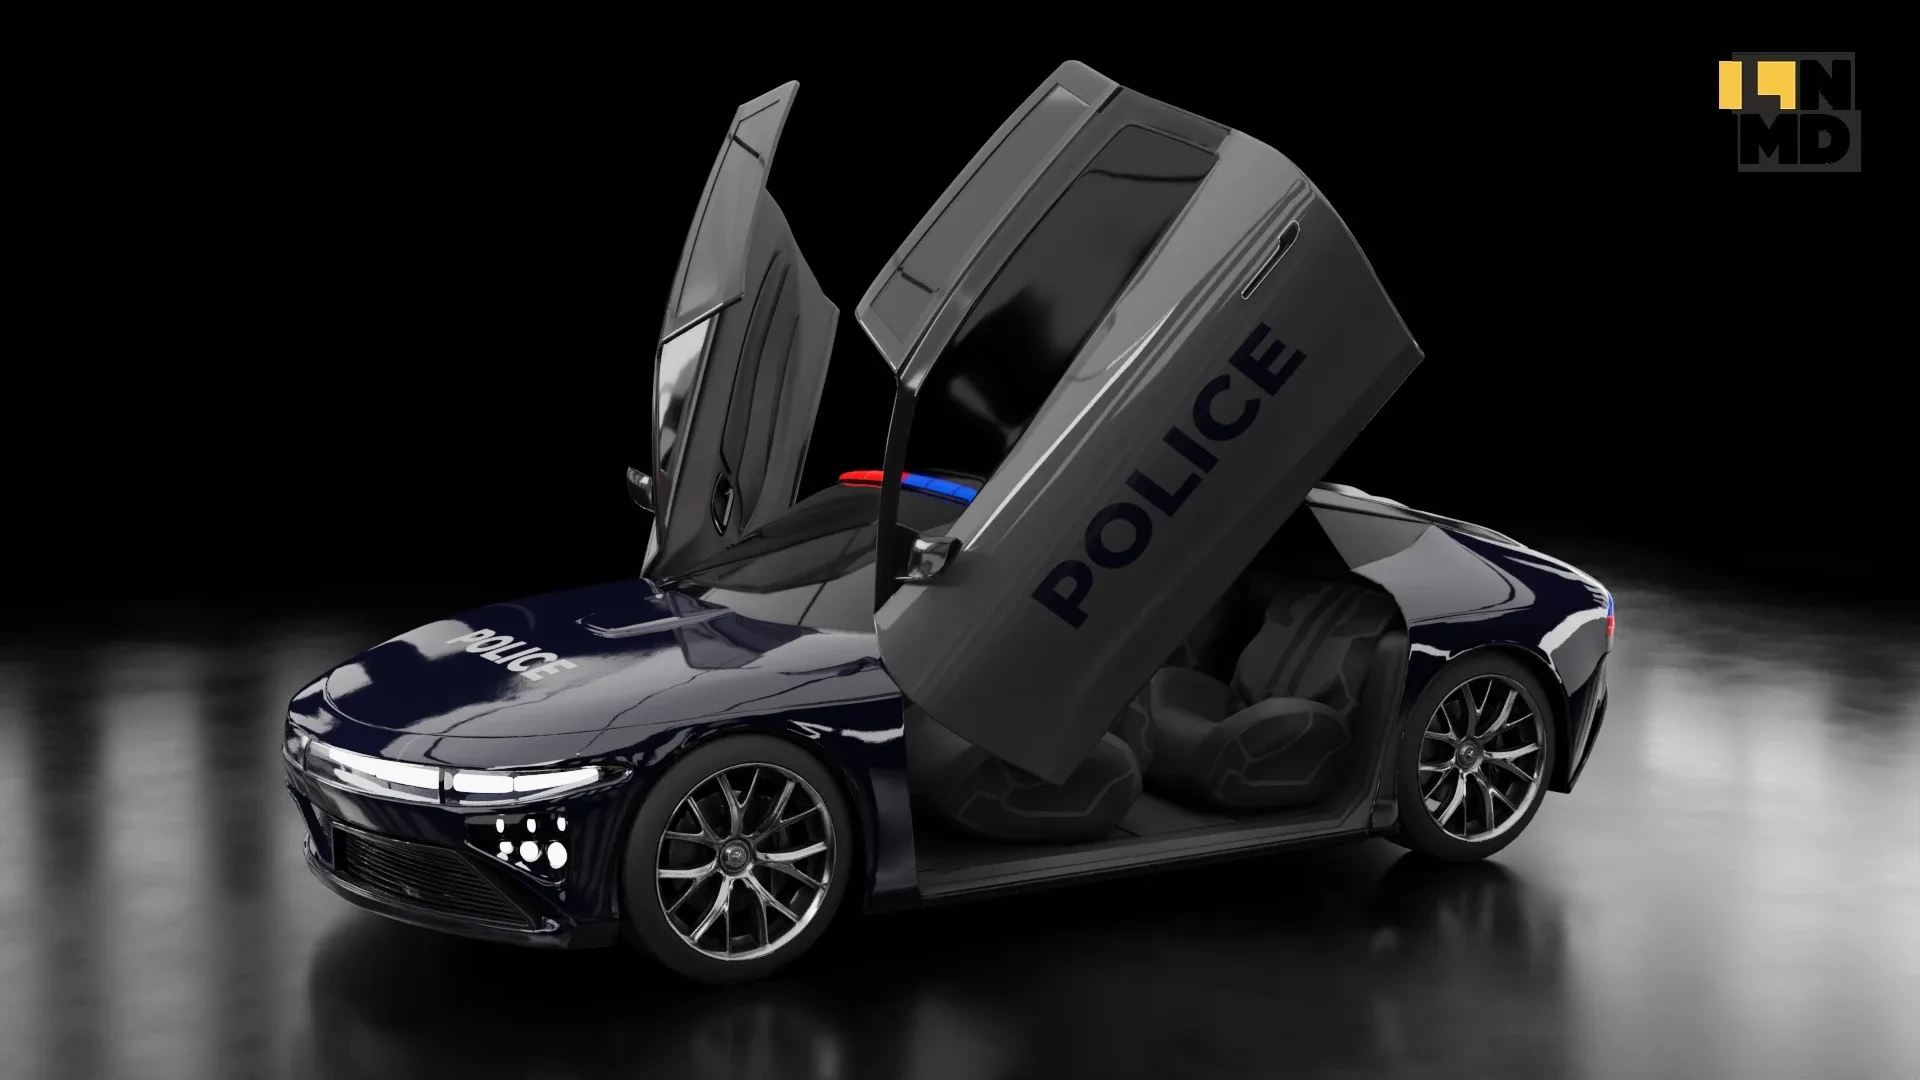 Generic Futuristic Vehicle Police Taxi Car with butterfly doors